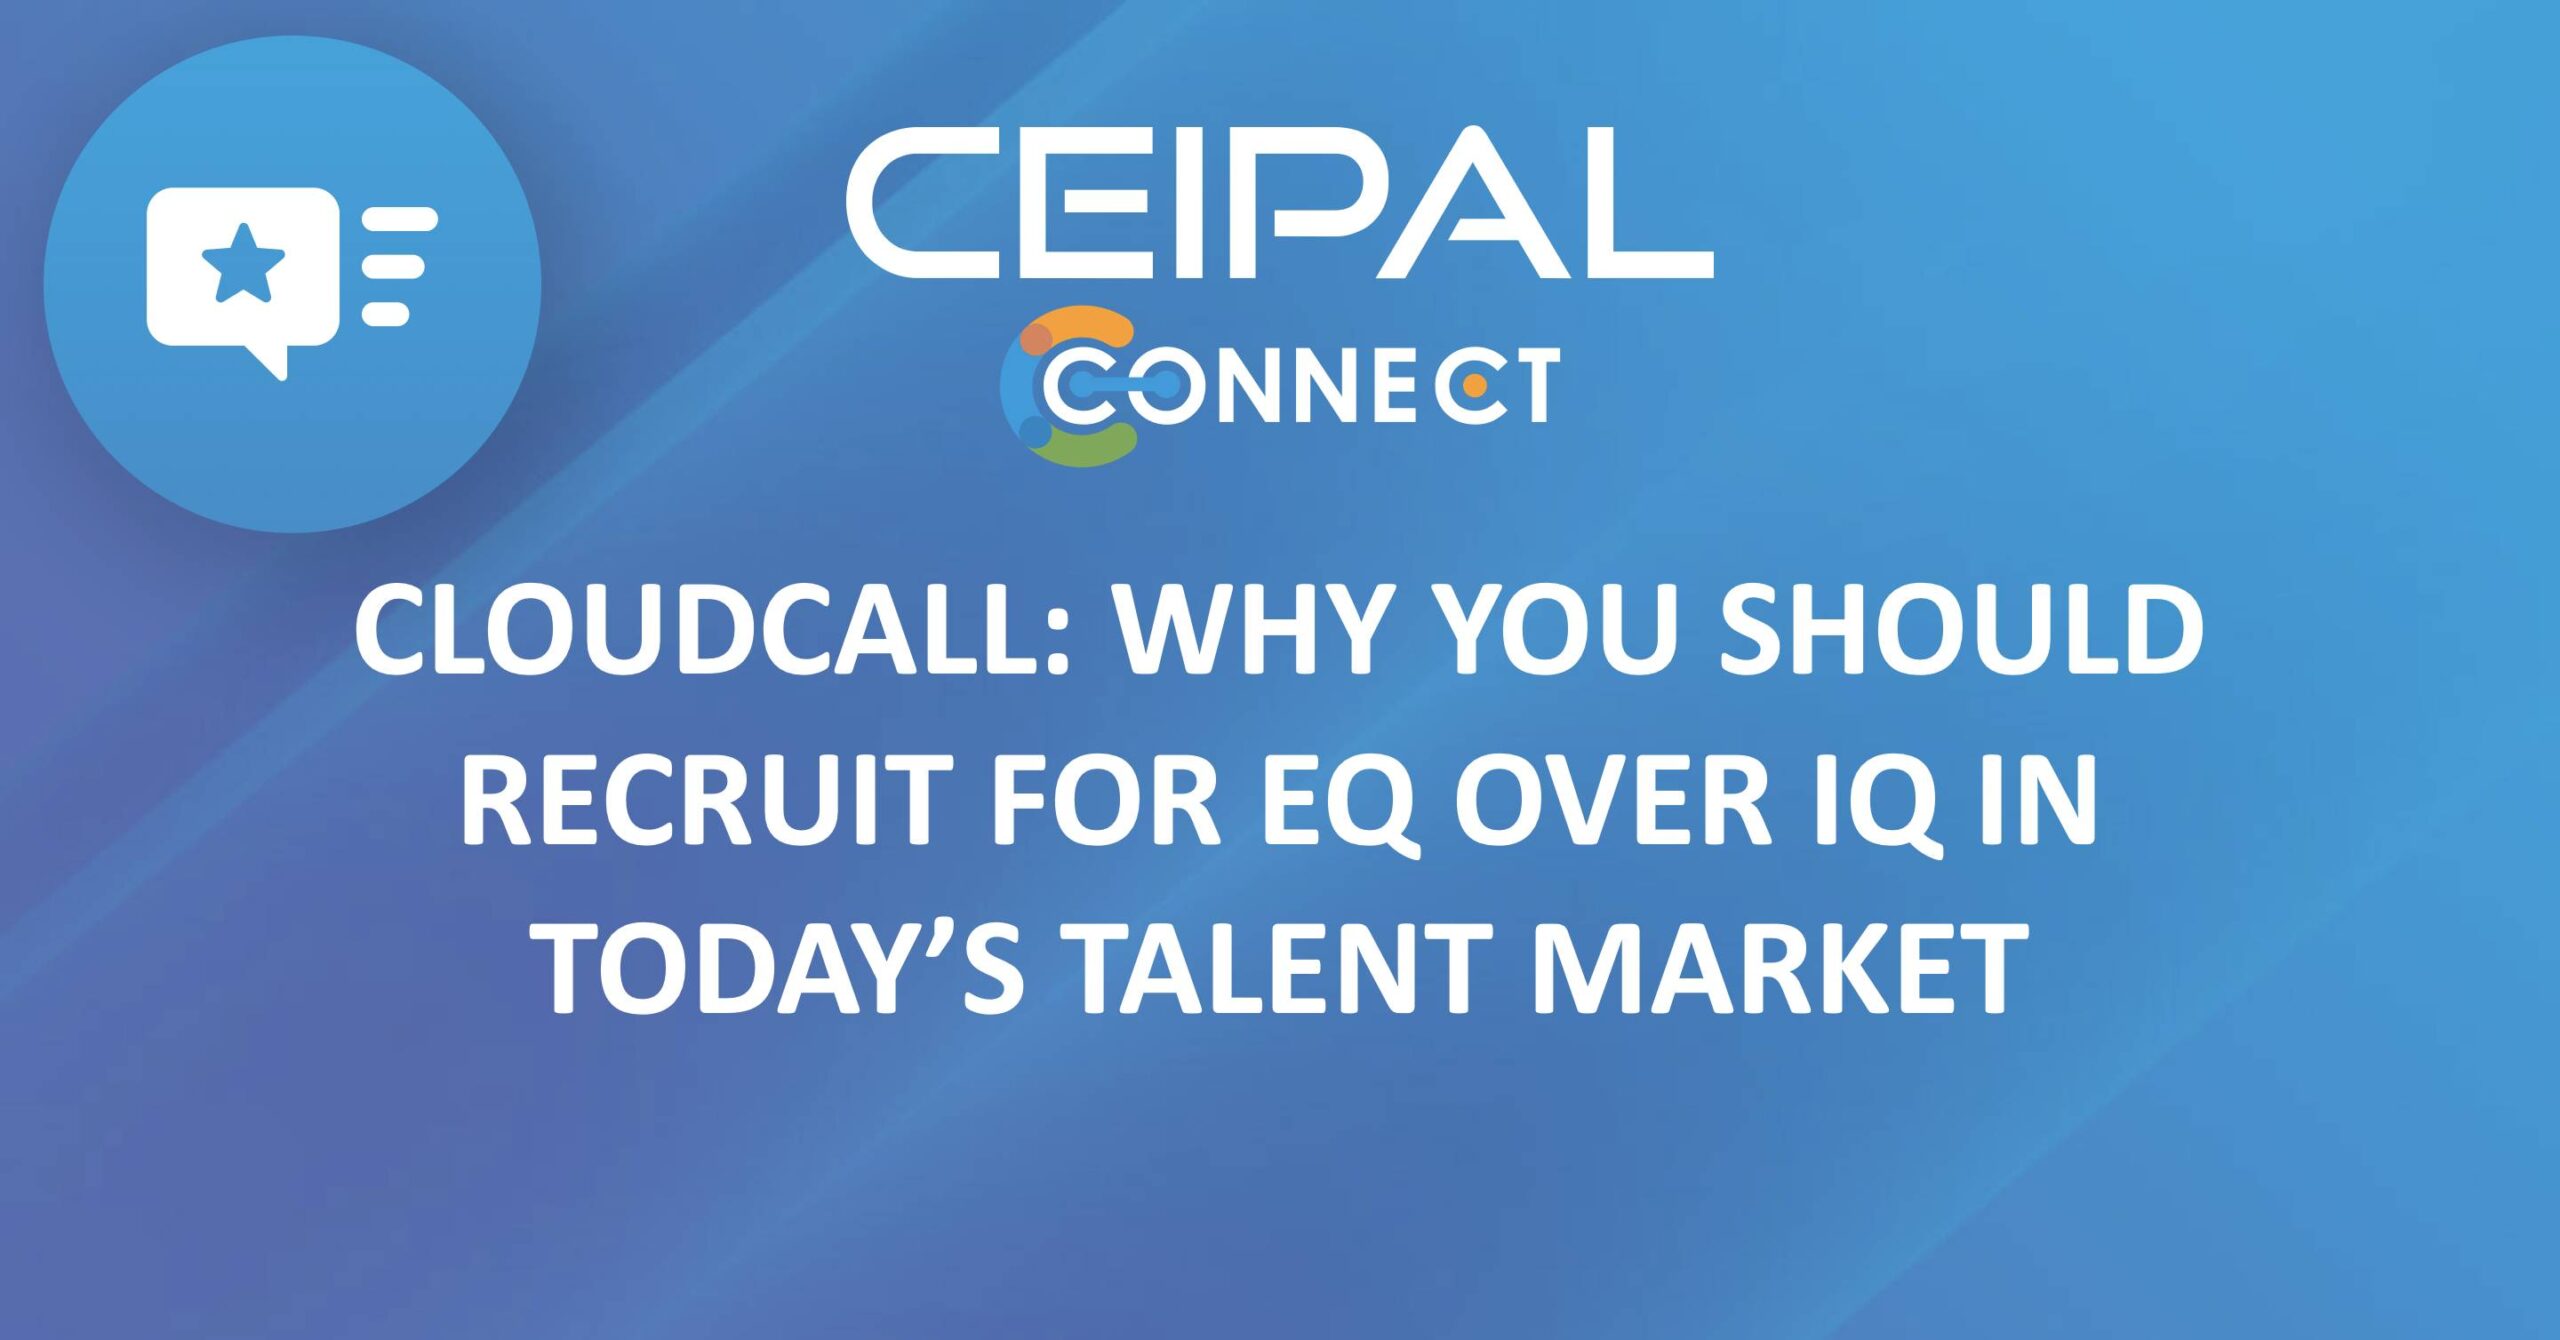 CloudCall: Why you should recruit for EQ over IQ in today’s talent market